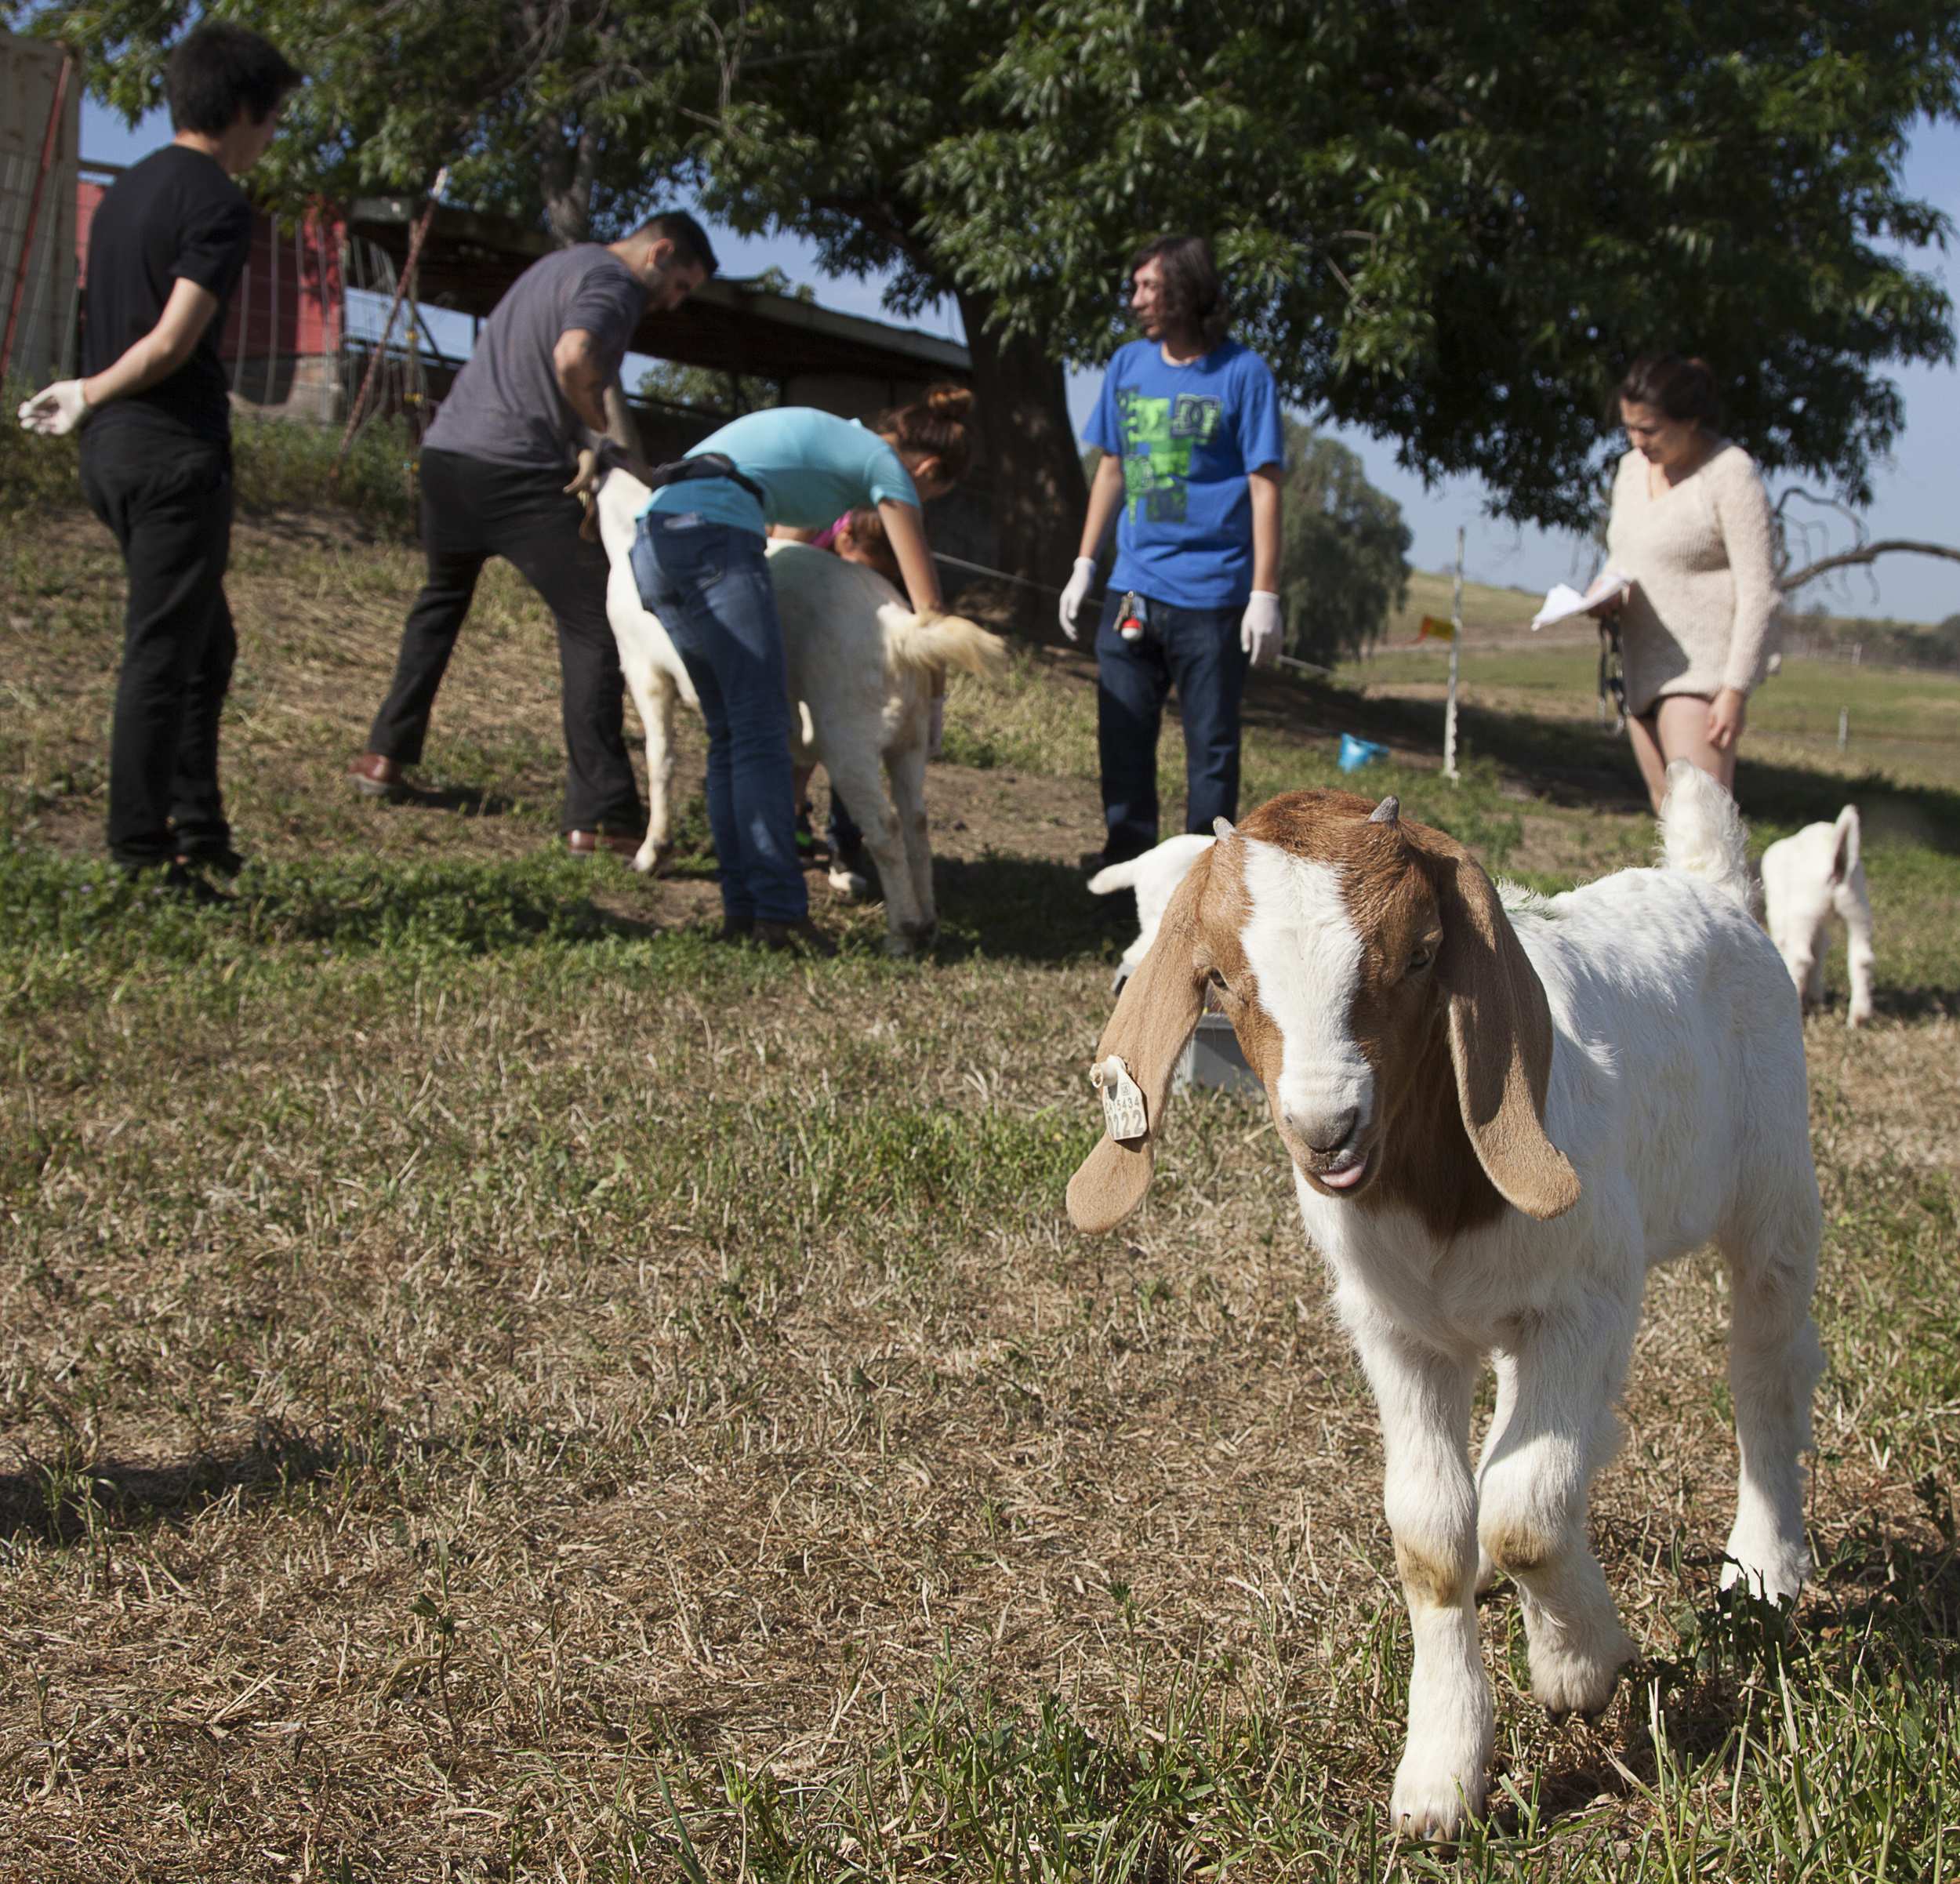  Goats are free to roam and pasture at the Pierce farm while students perform routine examinations in the background on Friday, March 20, 2015. The animals are all rounded up around 7pm and put into their pens to protect them from coyotes.  Read the 